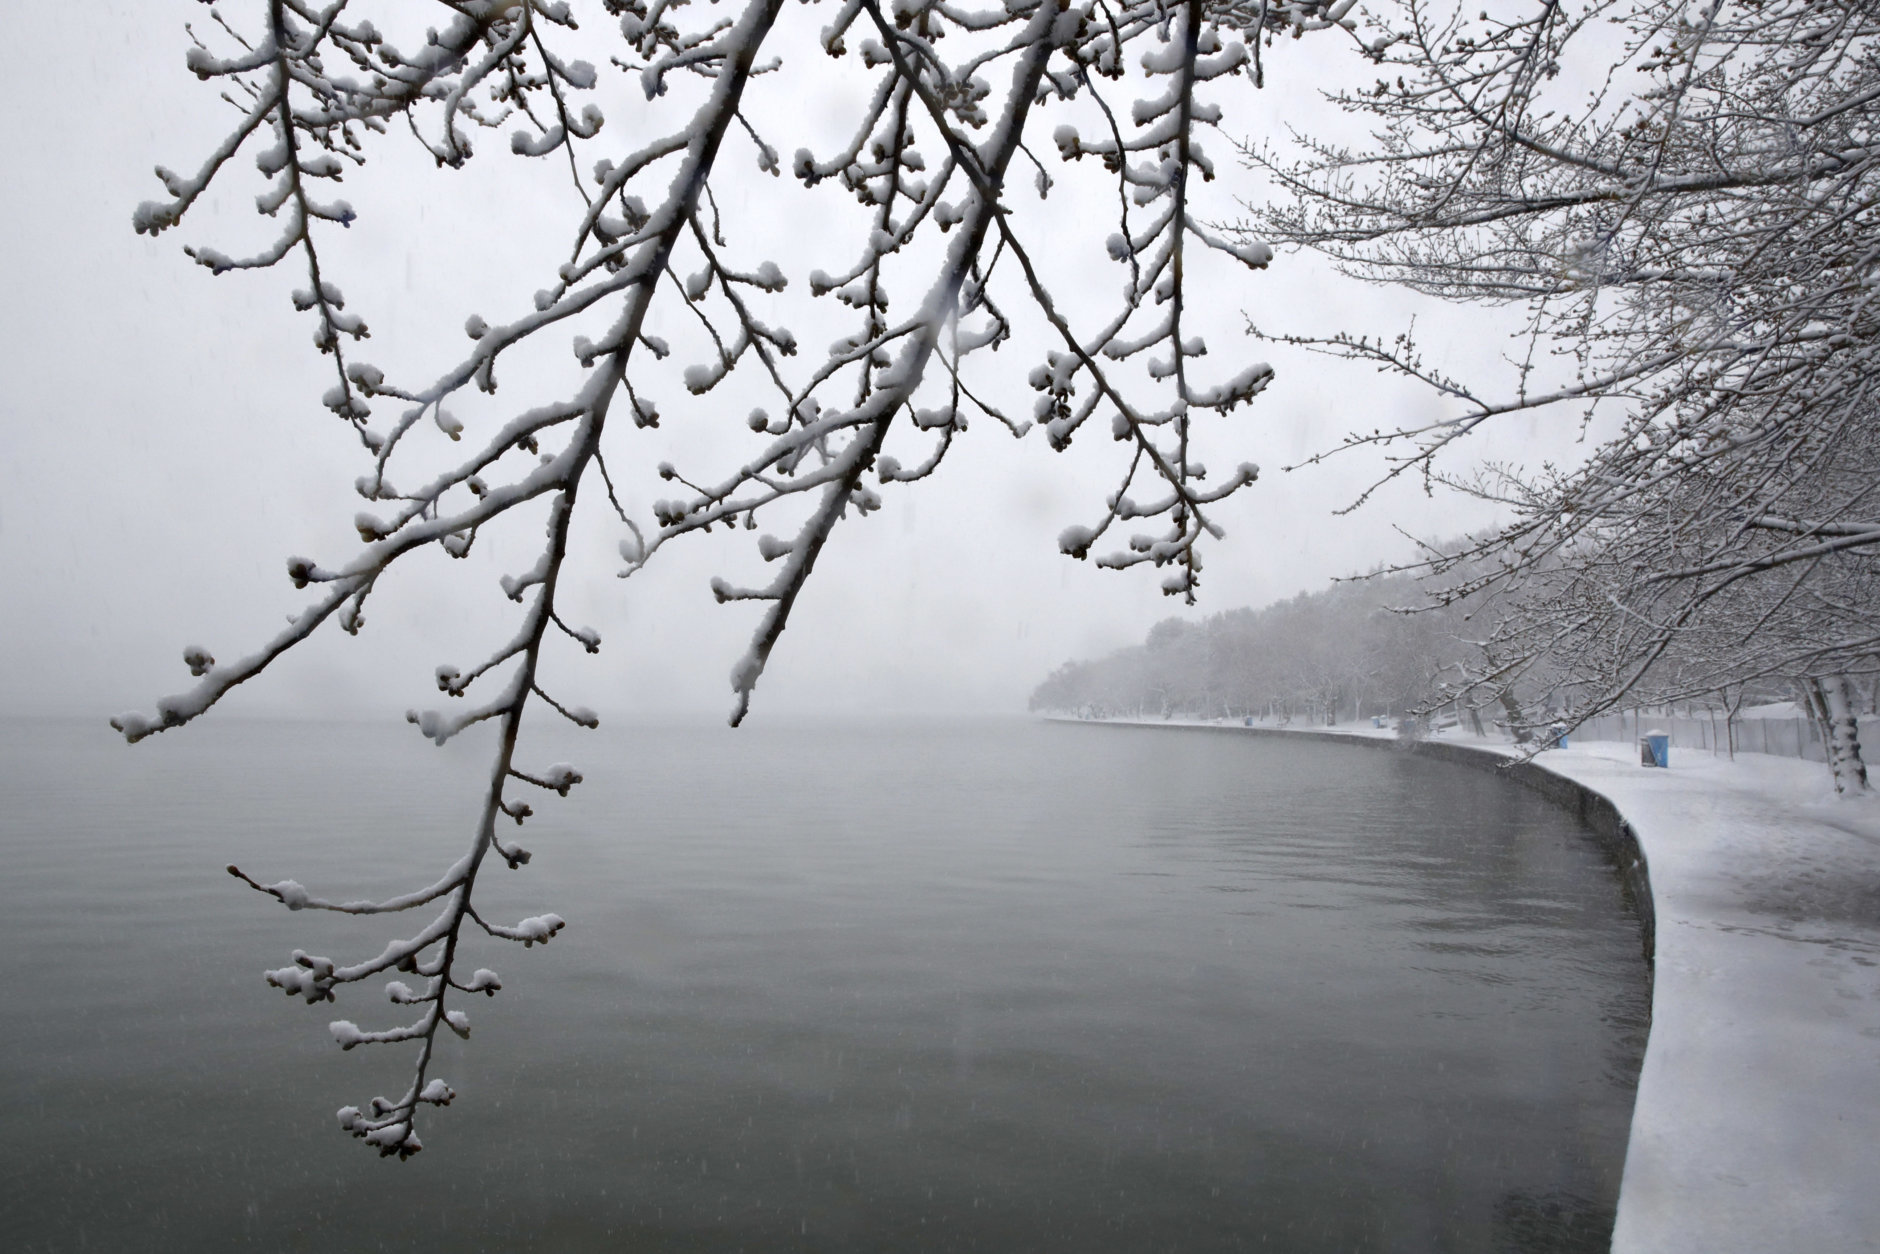 The monuments in the distance are obscured by falling snow as a snow storm increases in strength, coating cherry blossom trees at the tidal basin, Wednesday, March 21, 2018, in Washington, during a snow storm on the second day of spring. (AP Photo/Jacquelyn Martin)